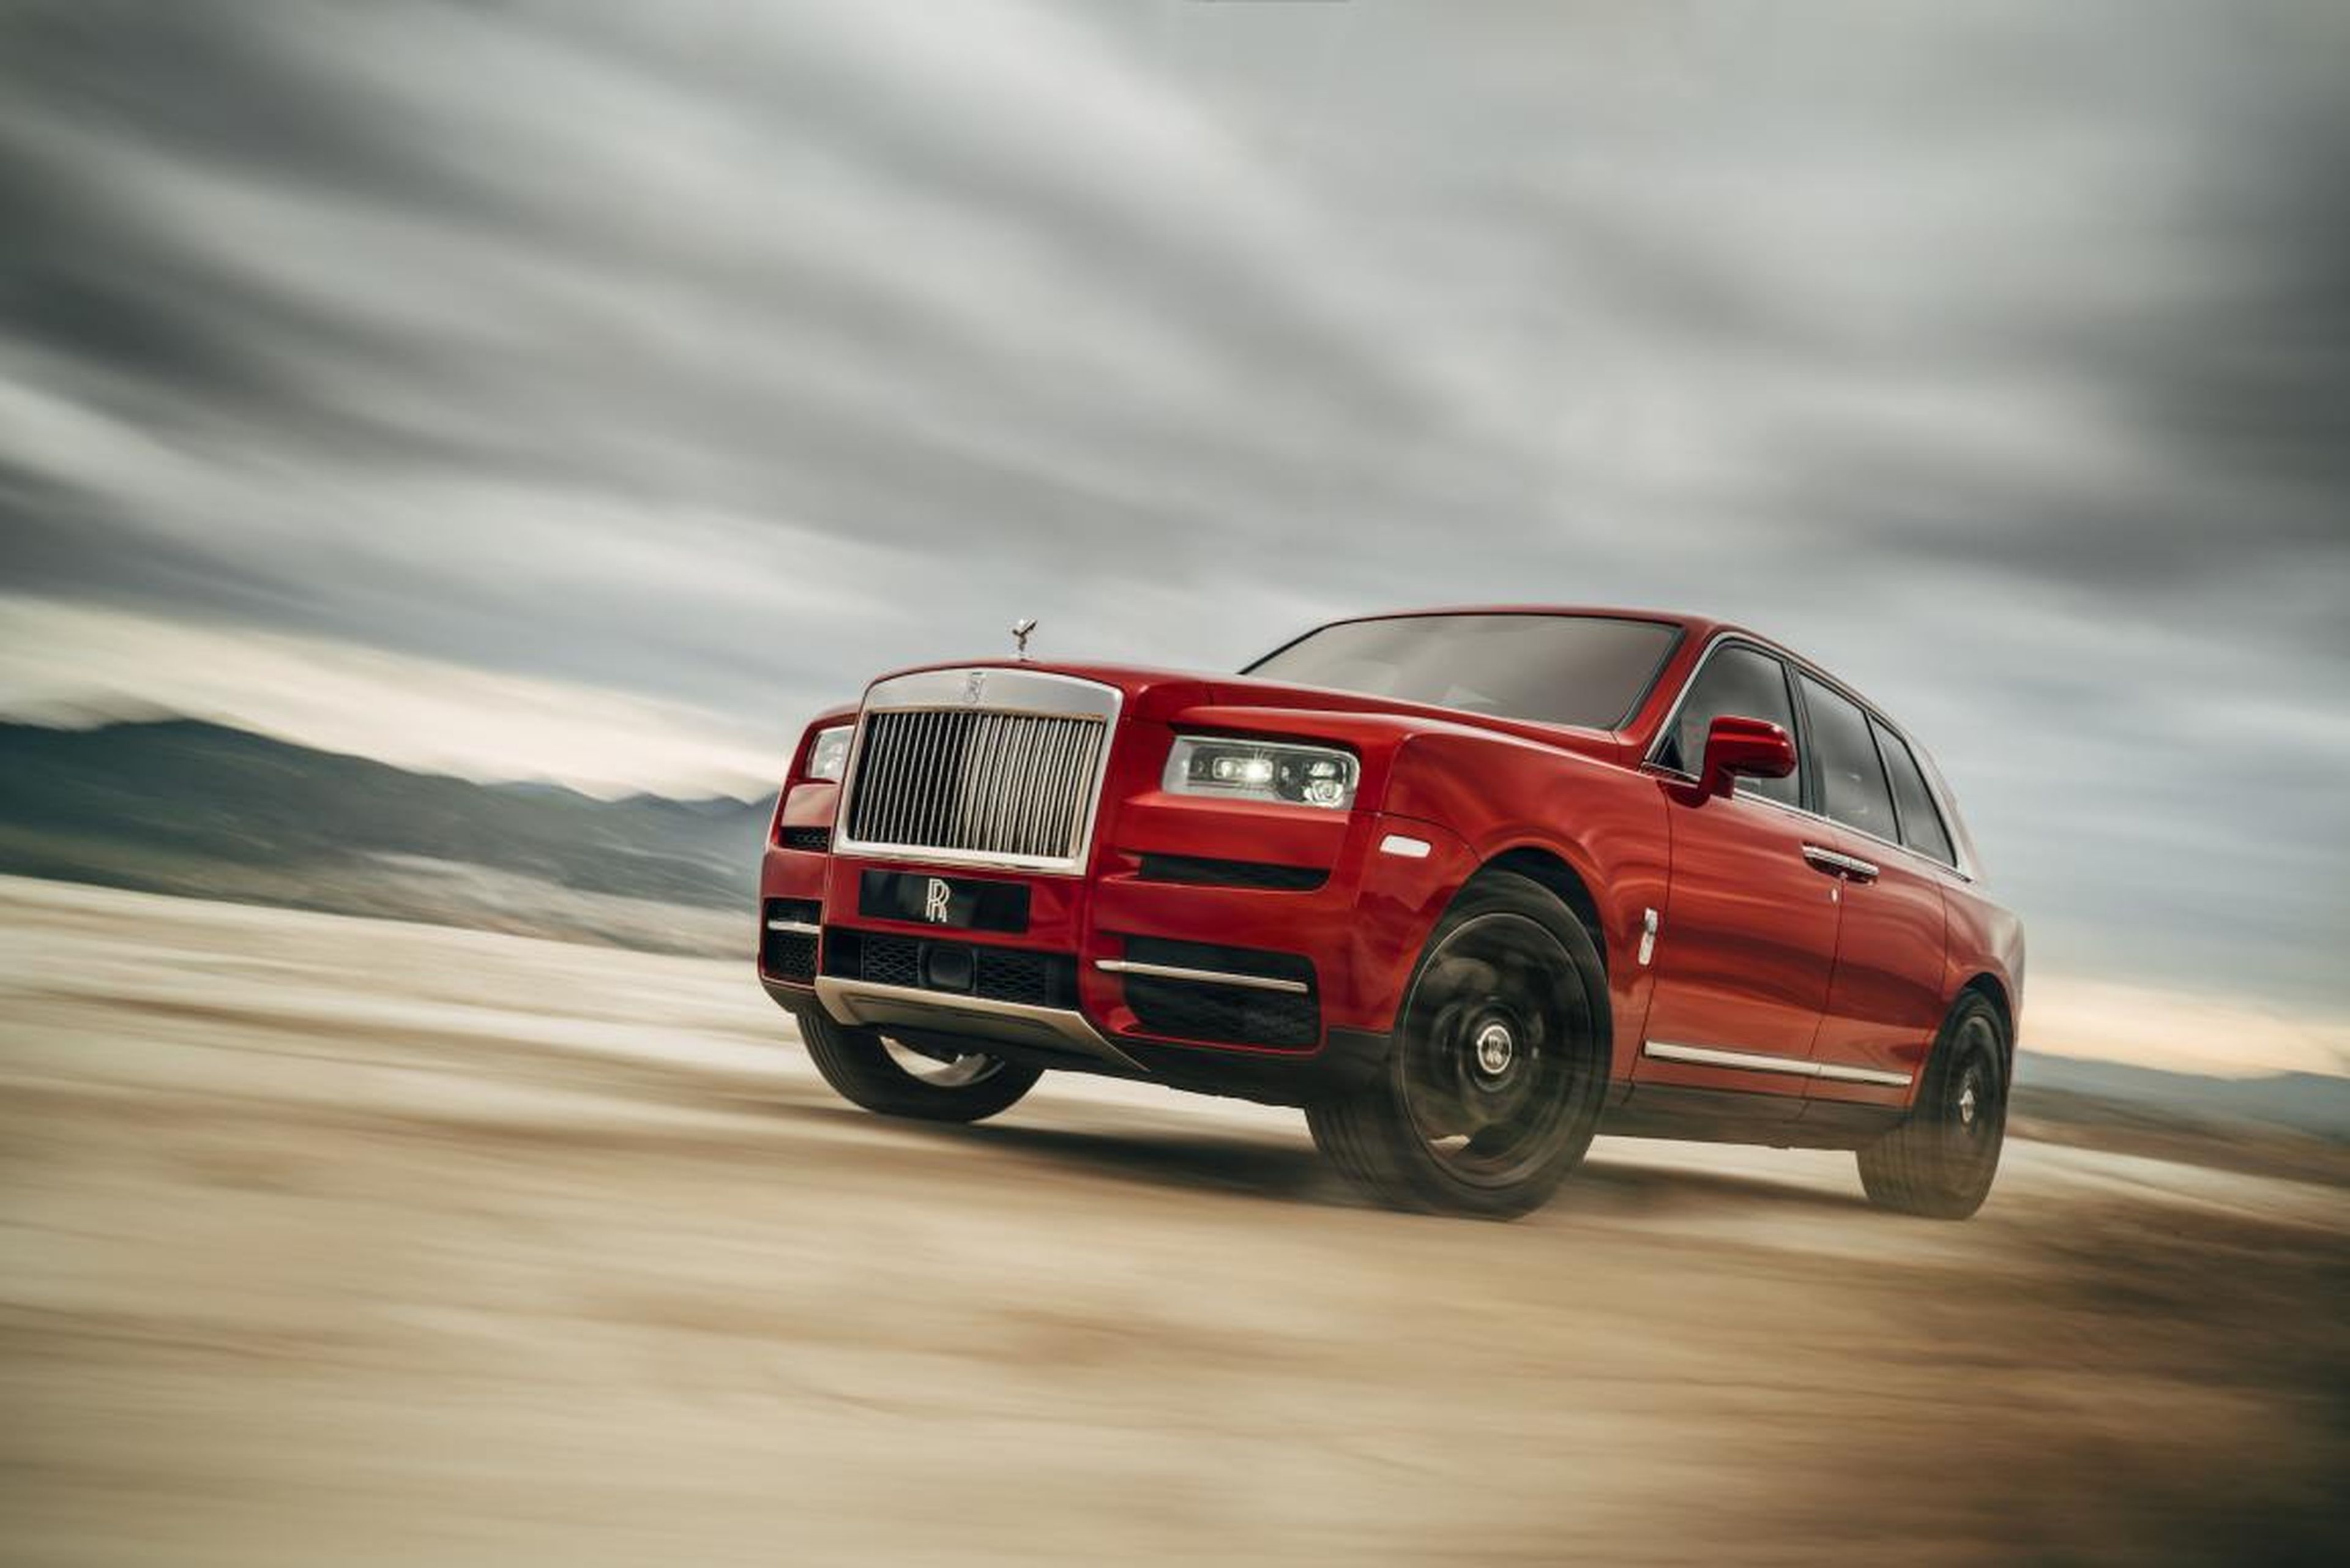 The Rolls-Royce Cullinan will be built on the company's new aluminum Architecture of Luxury platform that's ...